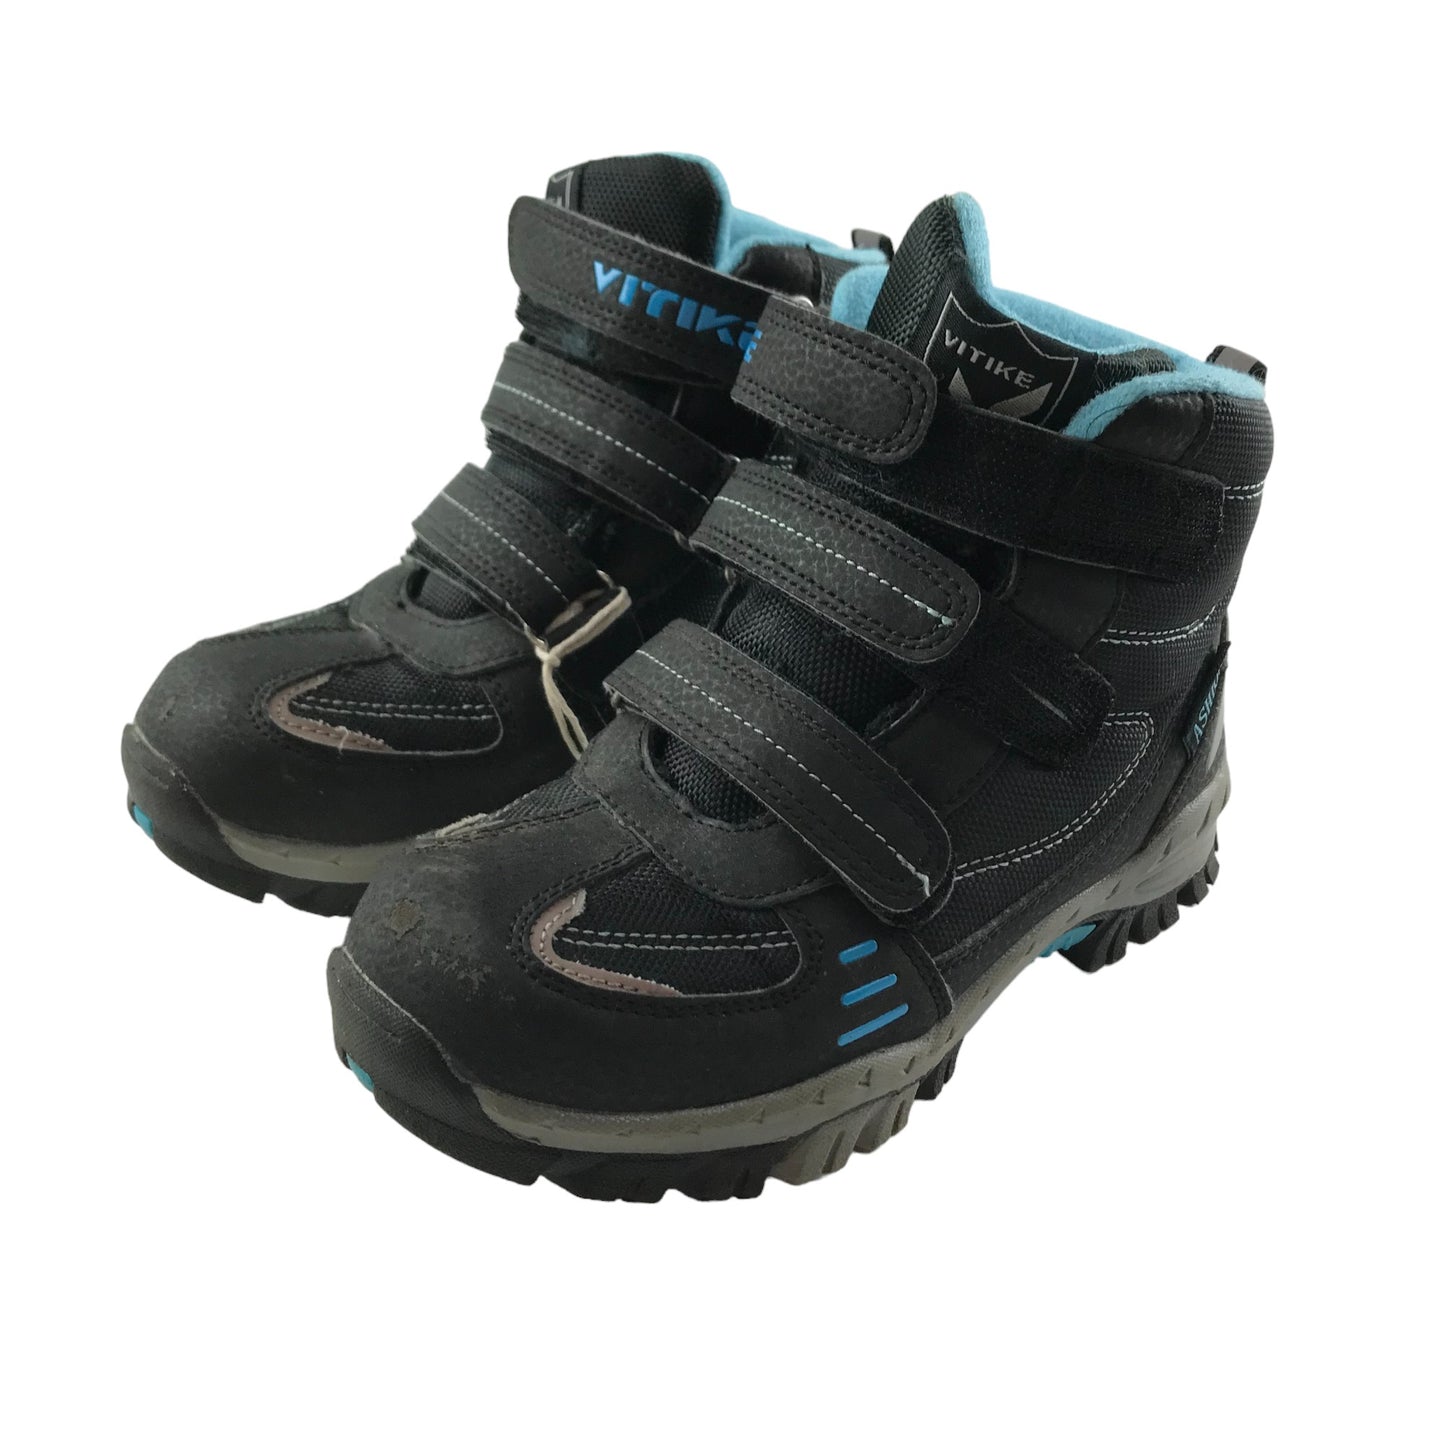 Vitike Walking Boots Shoe Size 1 Black and Blue Hiking Snow Climbing Shoes